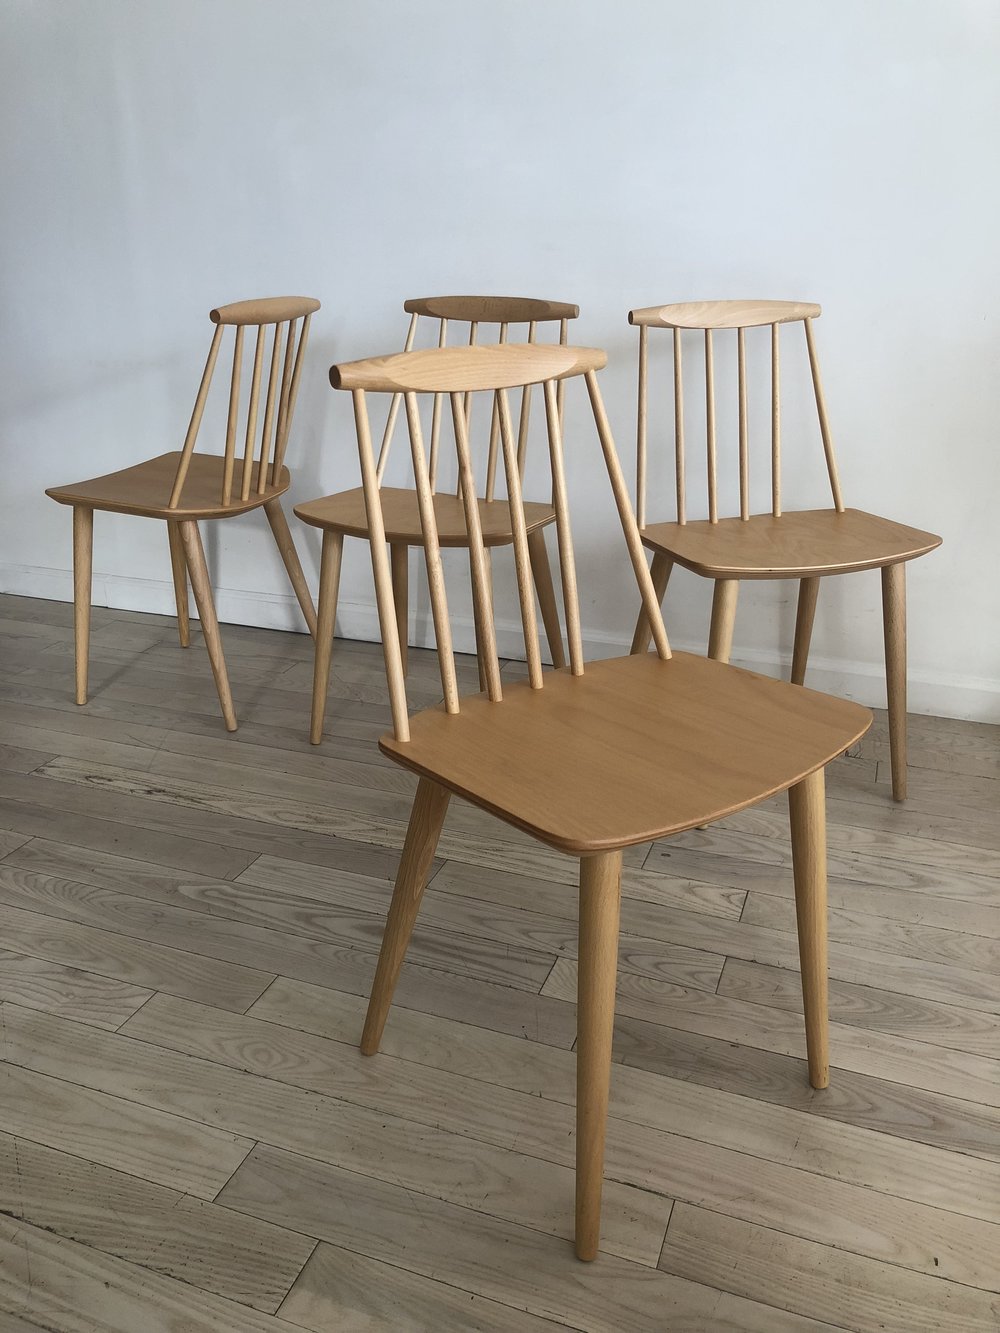 1978 Folke Palsson J77 Chairs for FDB Mobler, Made in Denmark-Set of 4